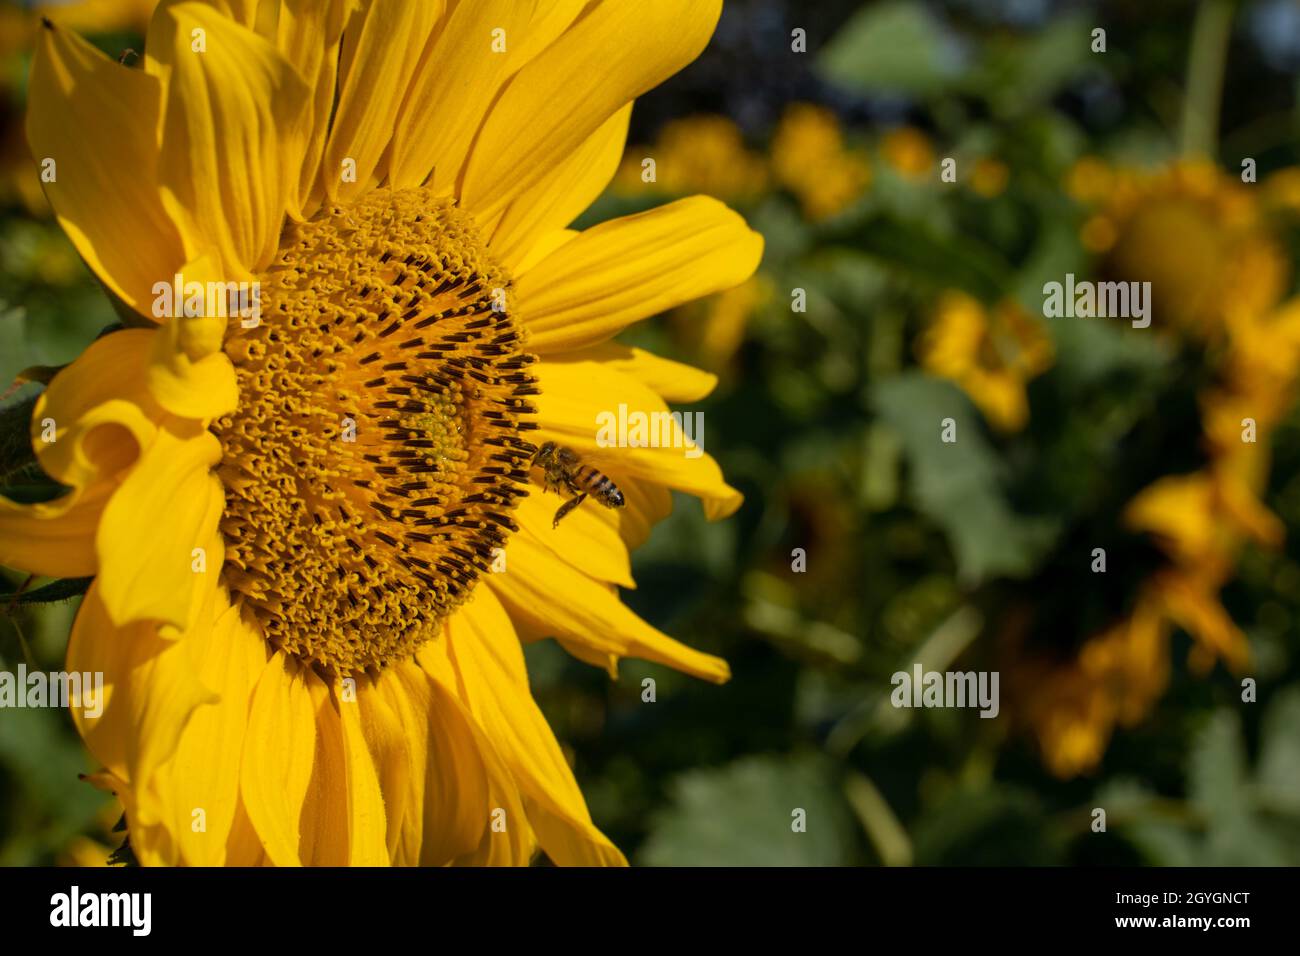 Bee approaching a sunflower on a bright summers day. Stock Photo